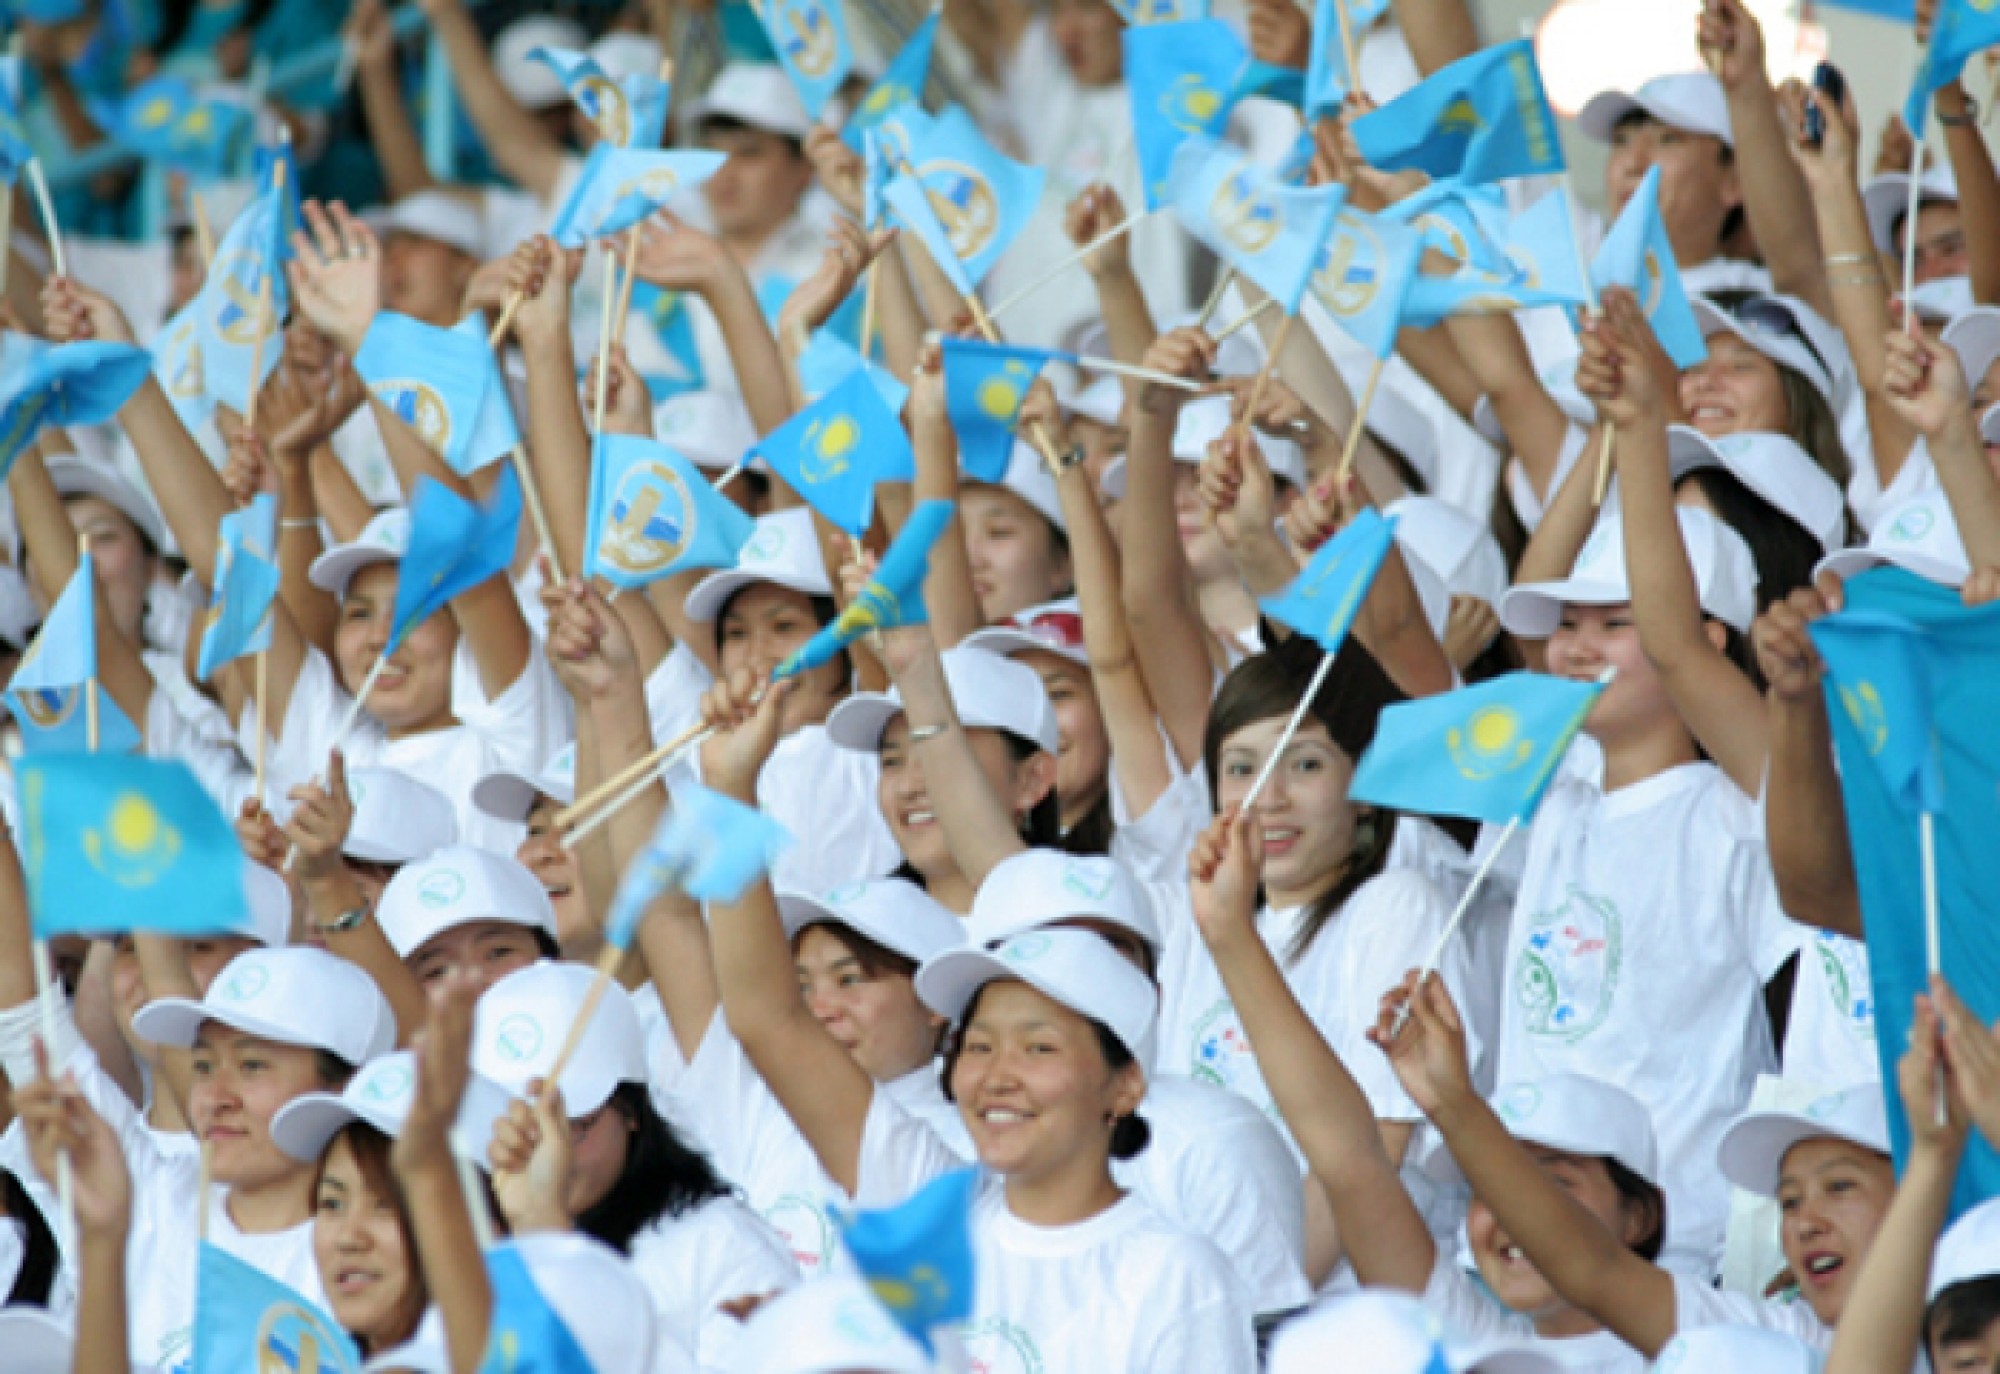 Opening ceremony of the Year of Youth to hold in Astana